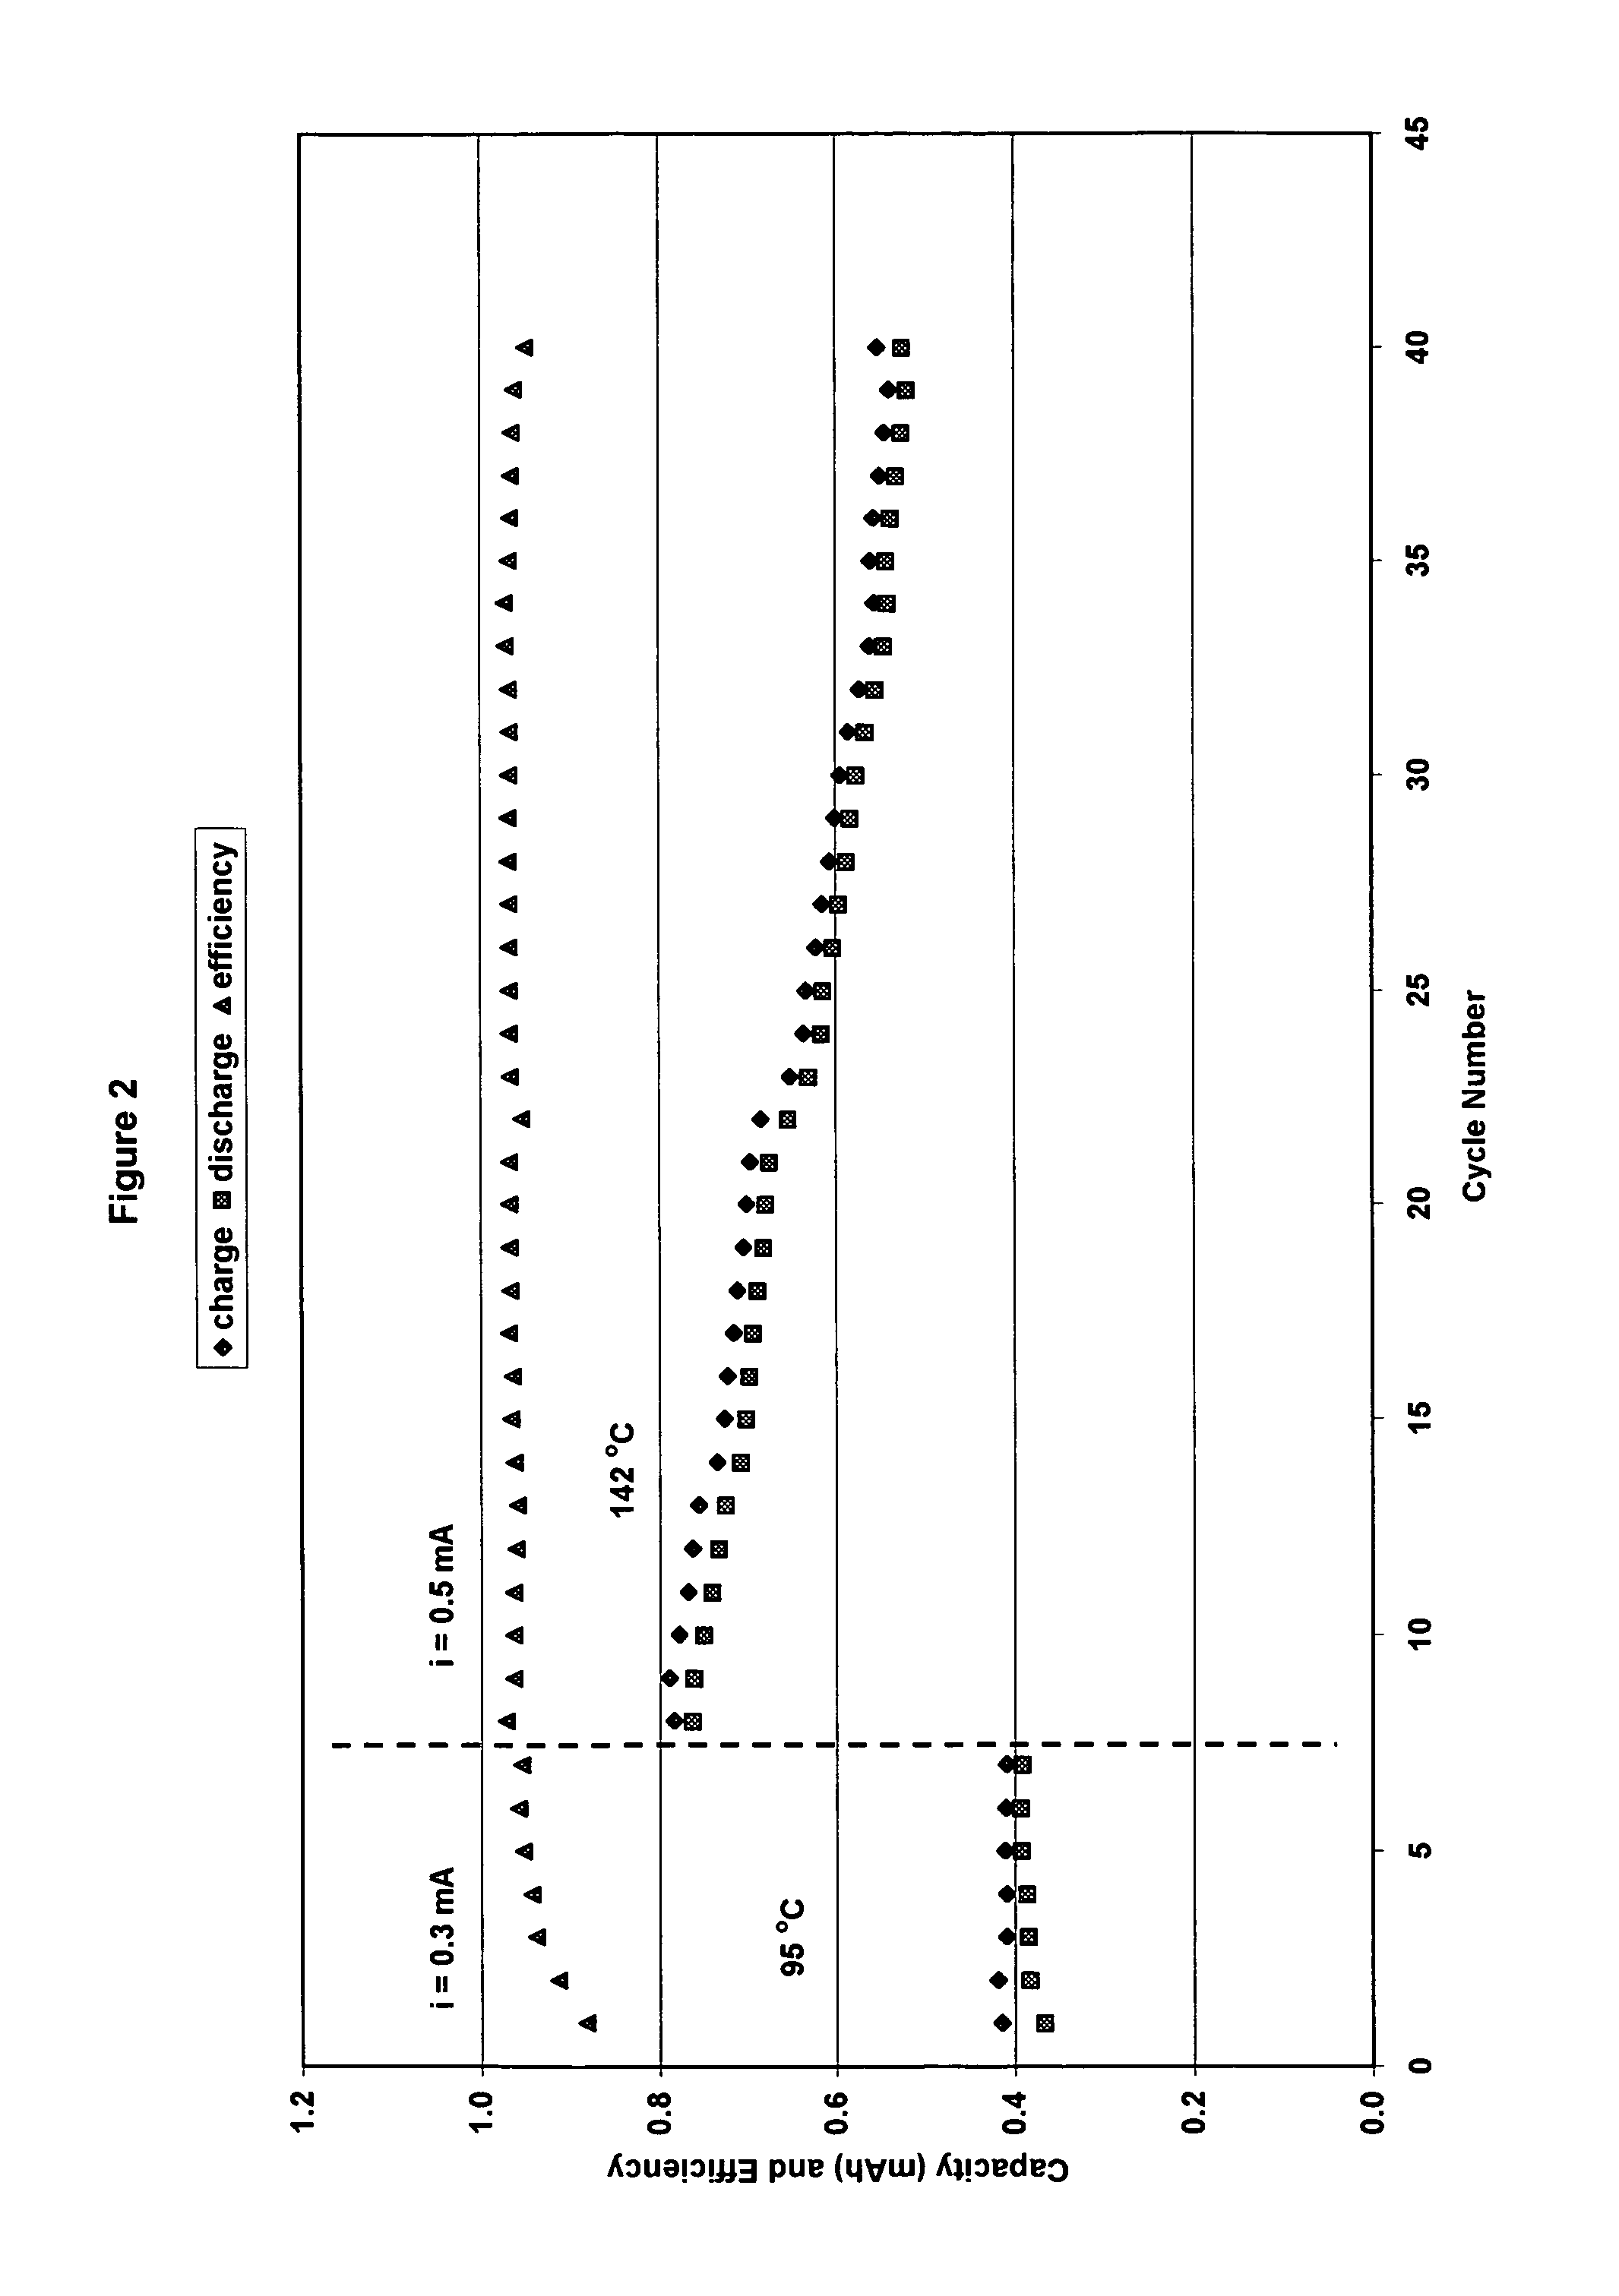 Lithium-ion cell with a wide operating temperature range